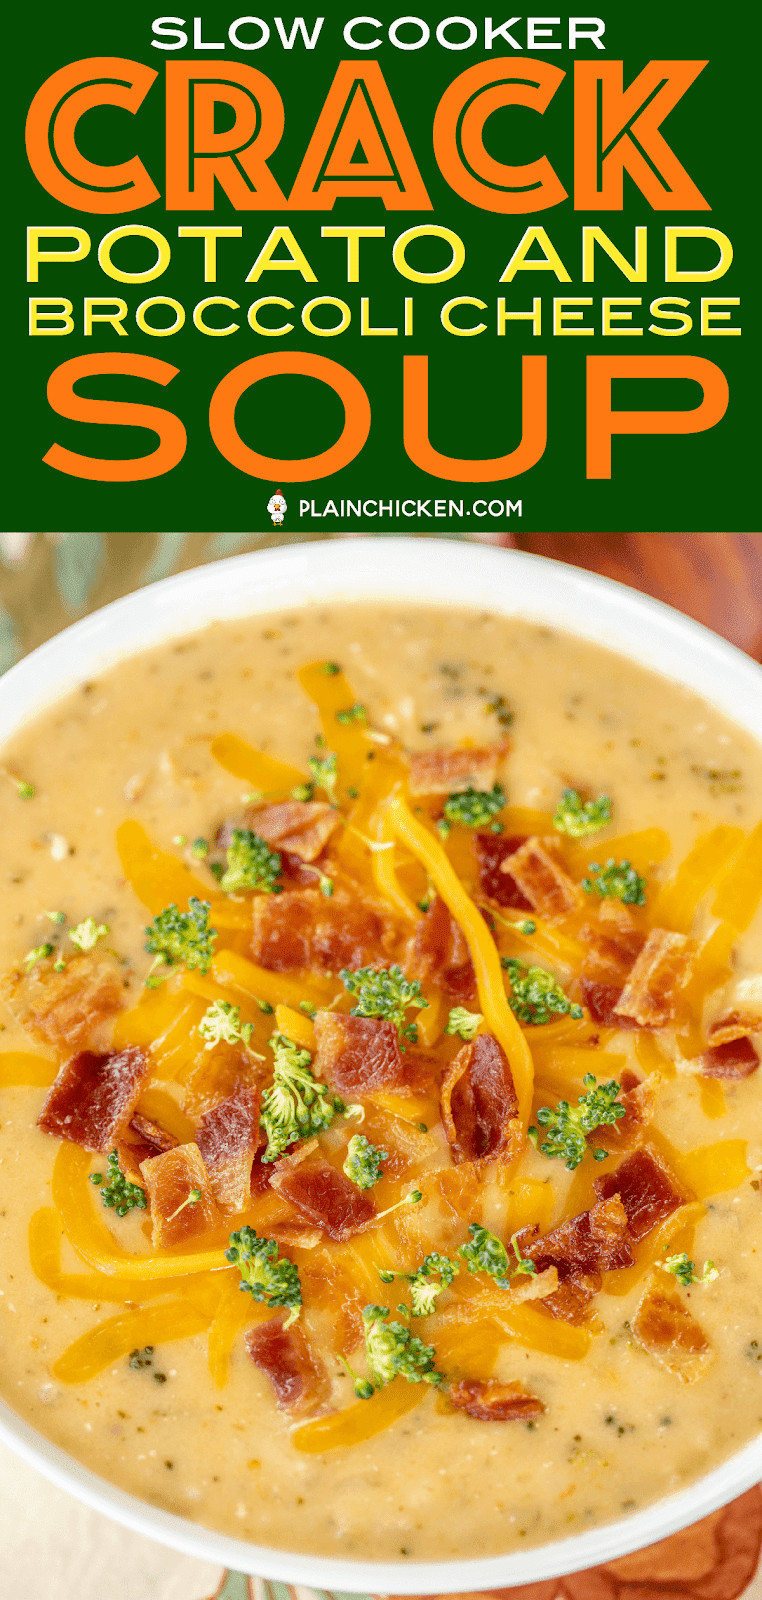 Slow Cooker Broccoli Cheddar Soup
 Slow Cooker Crack Potato and Broccoli Cheese Soup